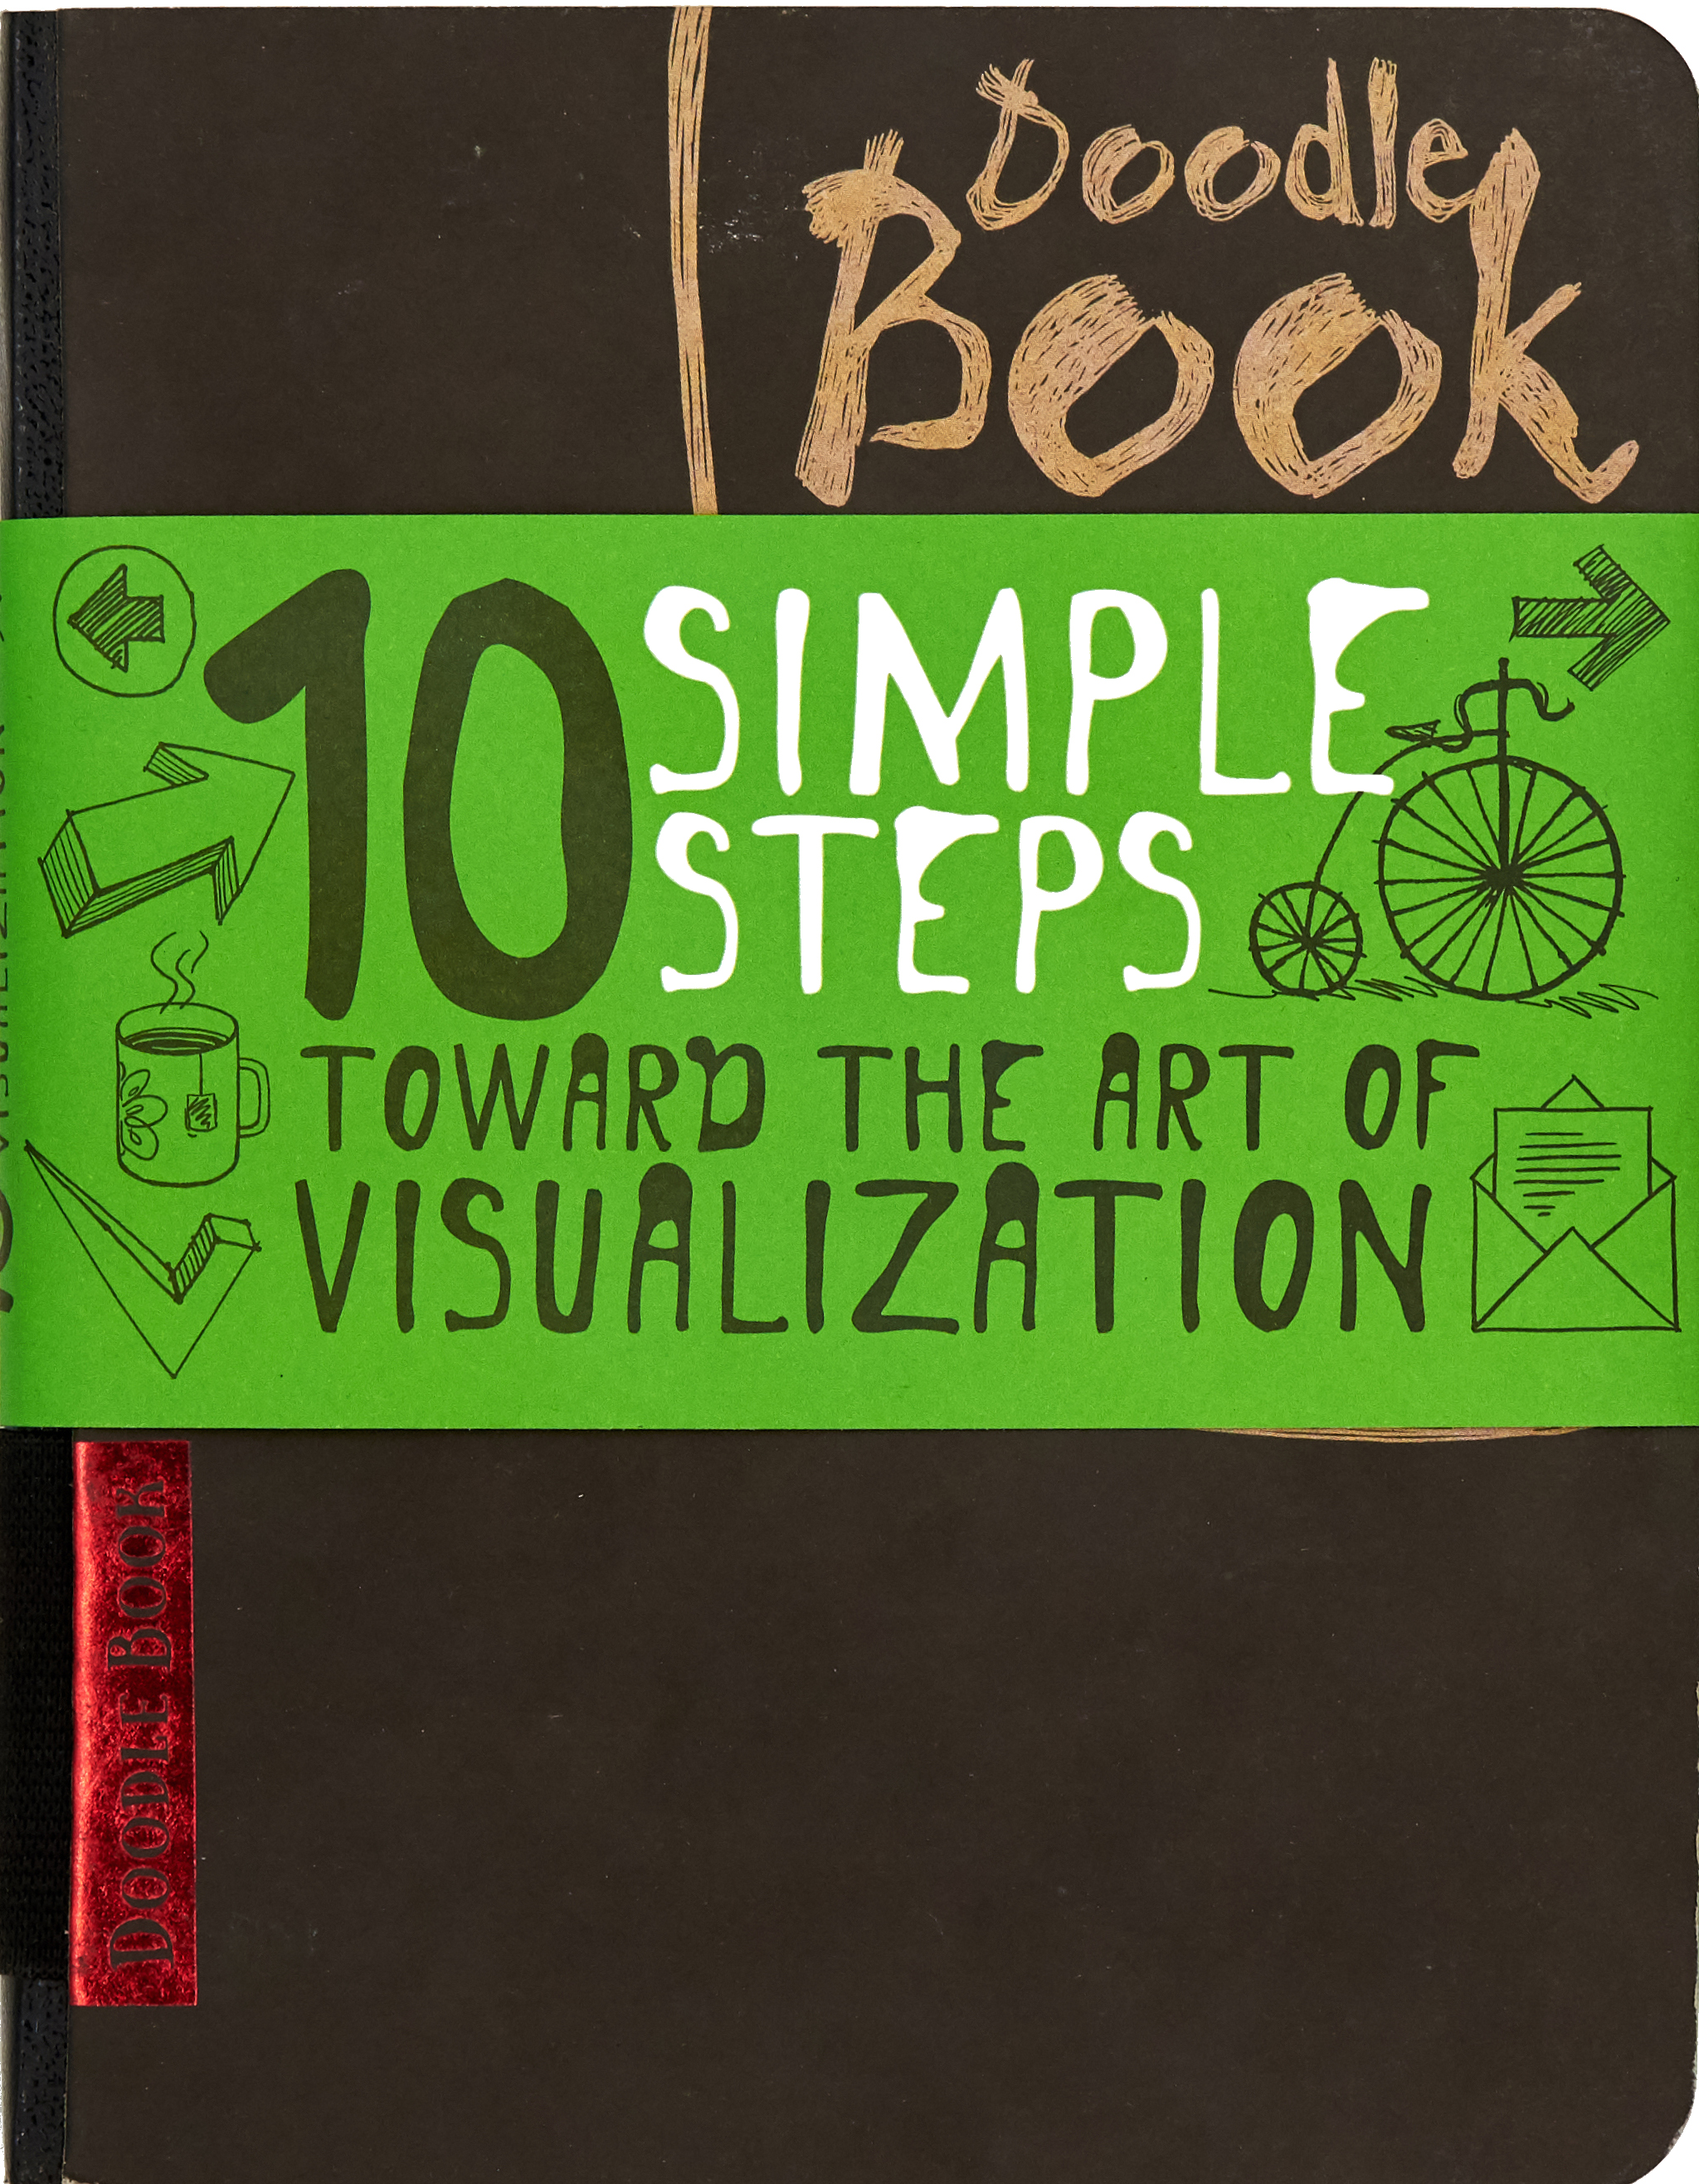 10 simple steps towards the art of visualization